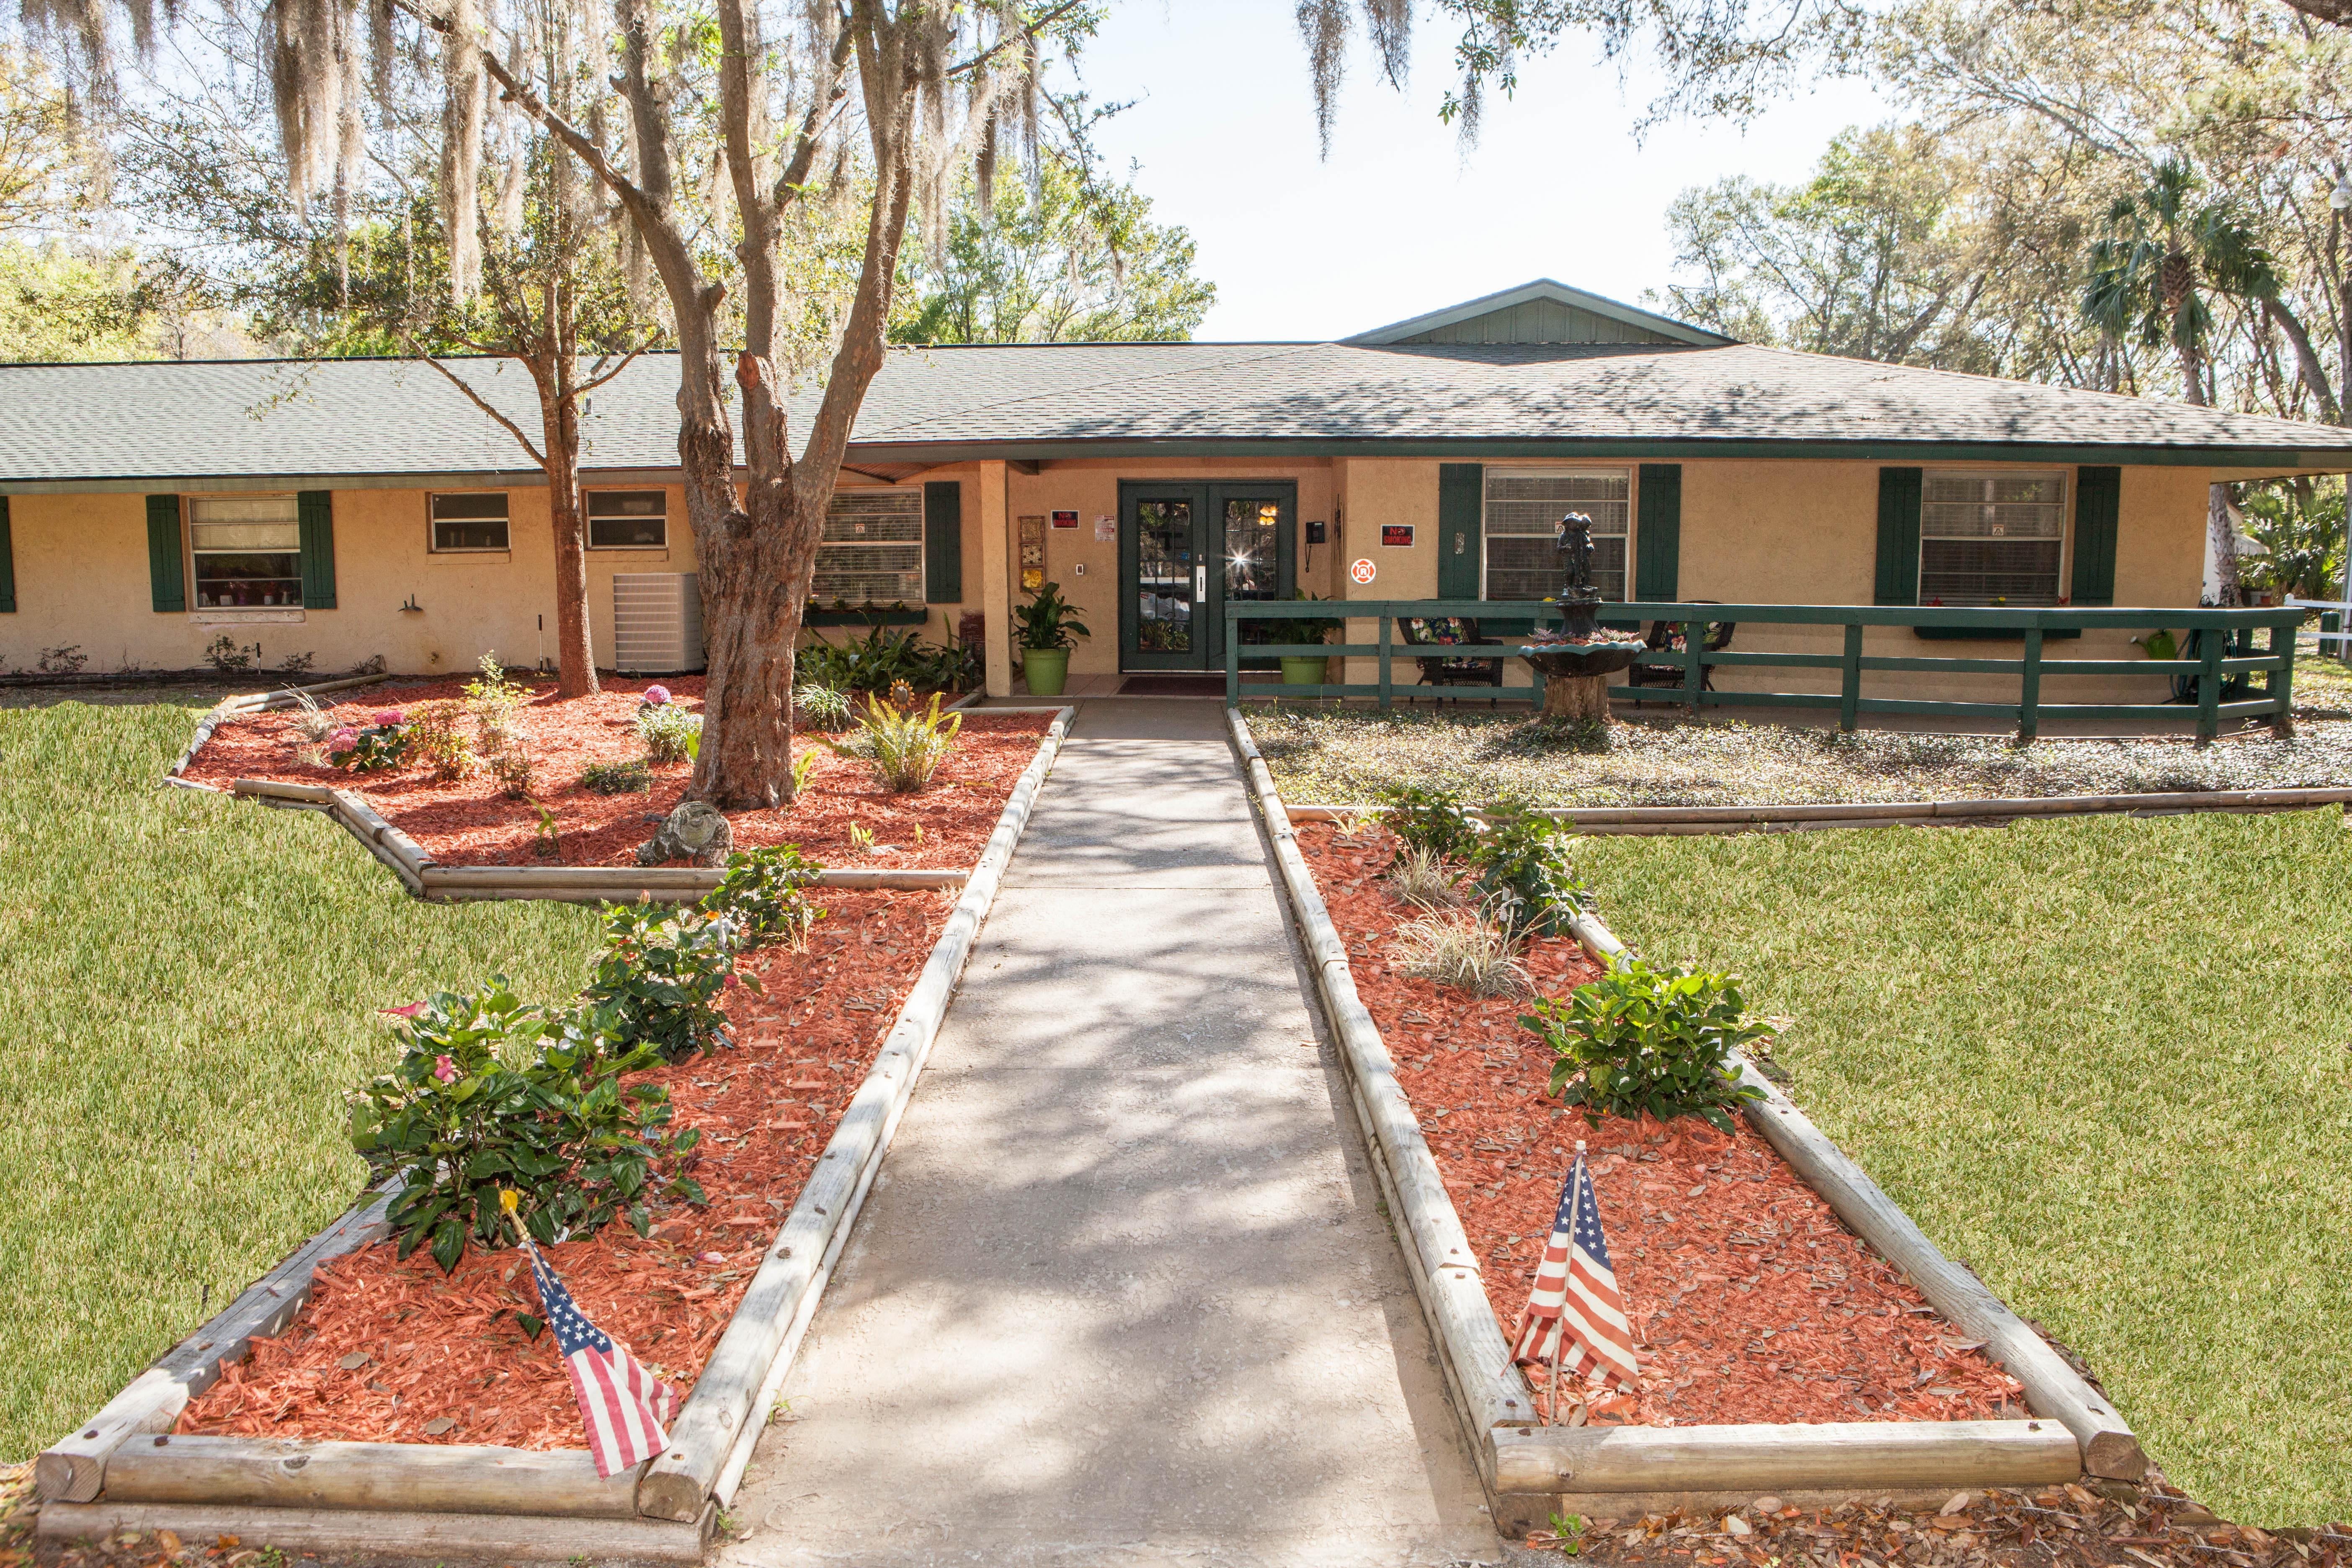 The Gardens Assisted Living Facility and Memory Care